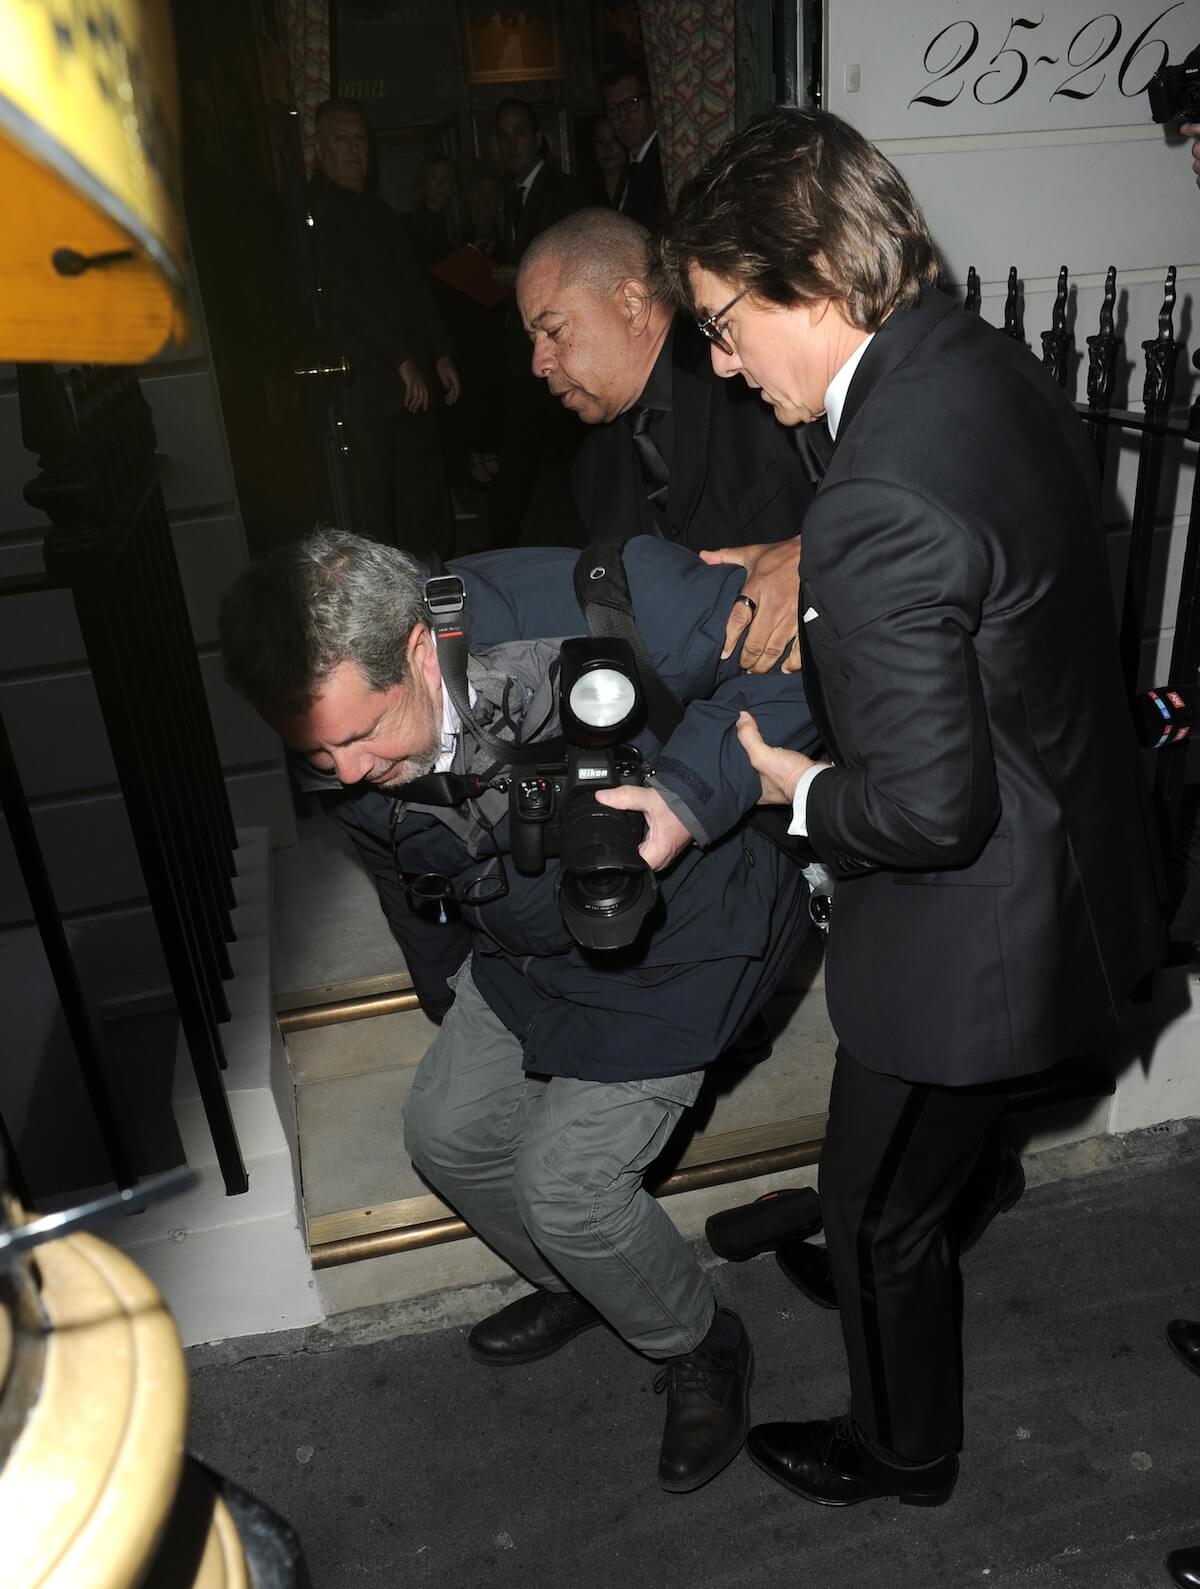 Tom Cruise helps a paparazzi who has stumbled